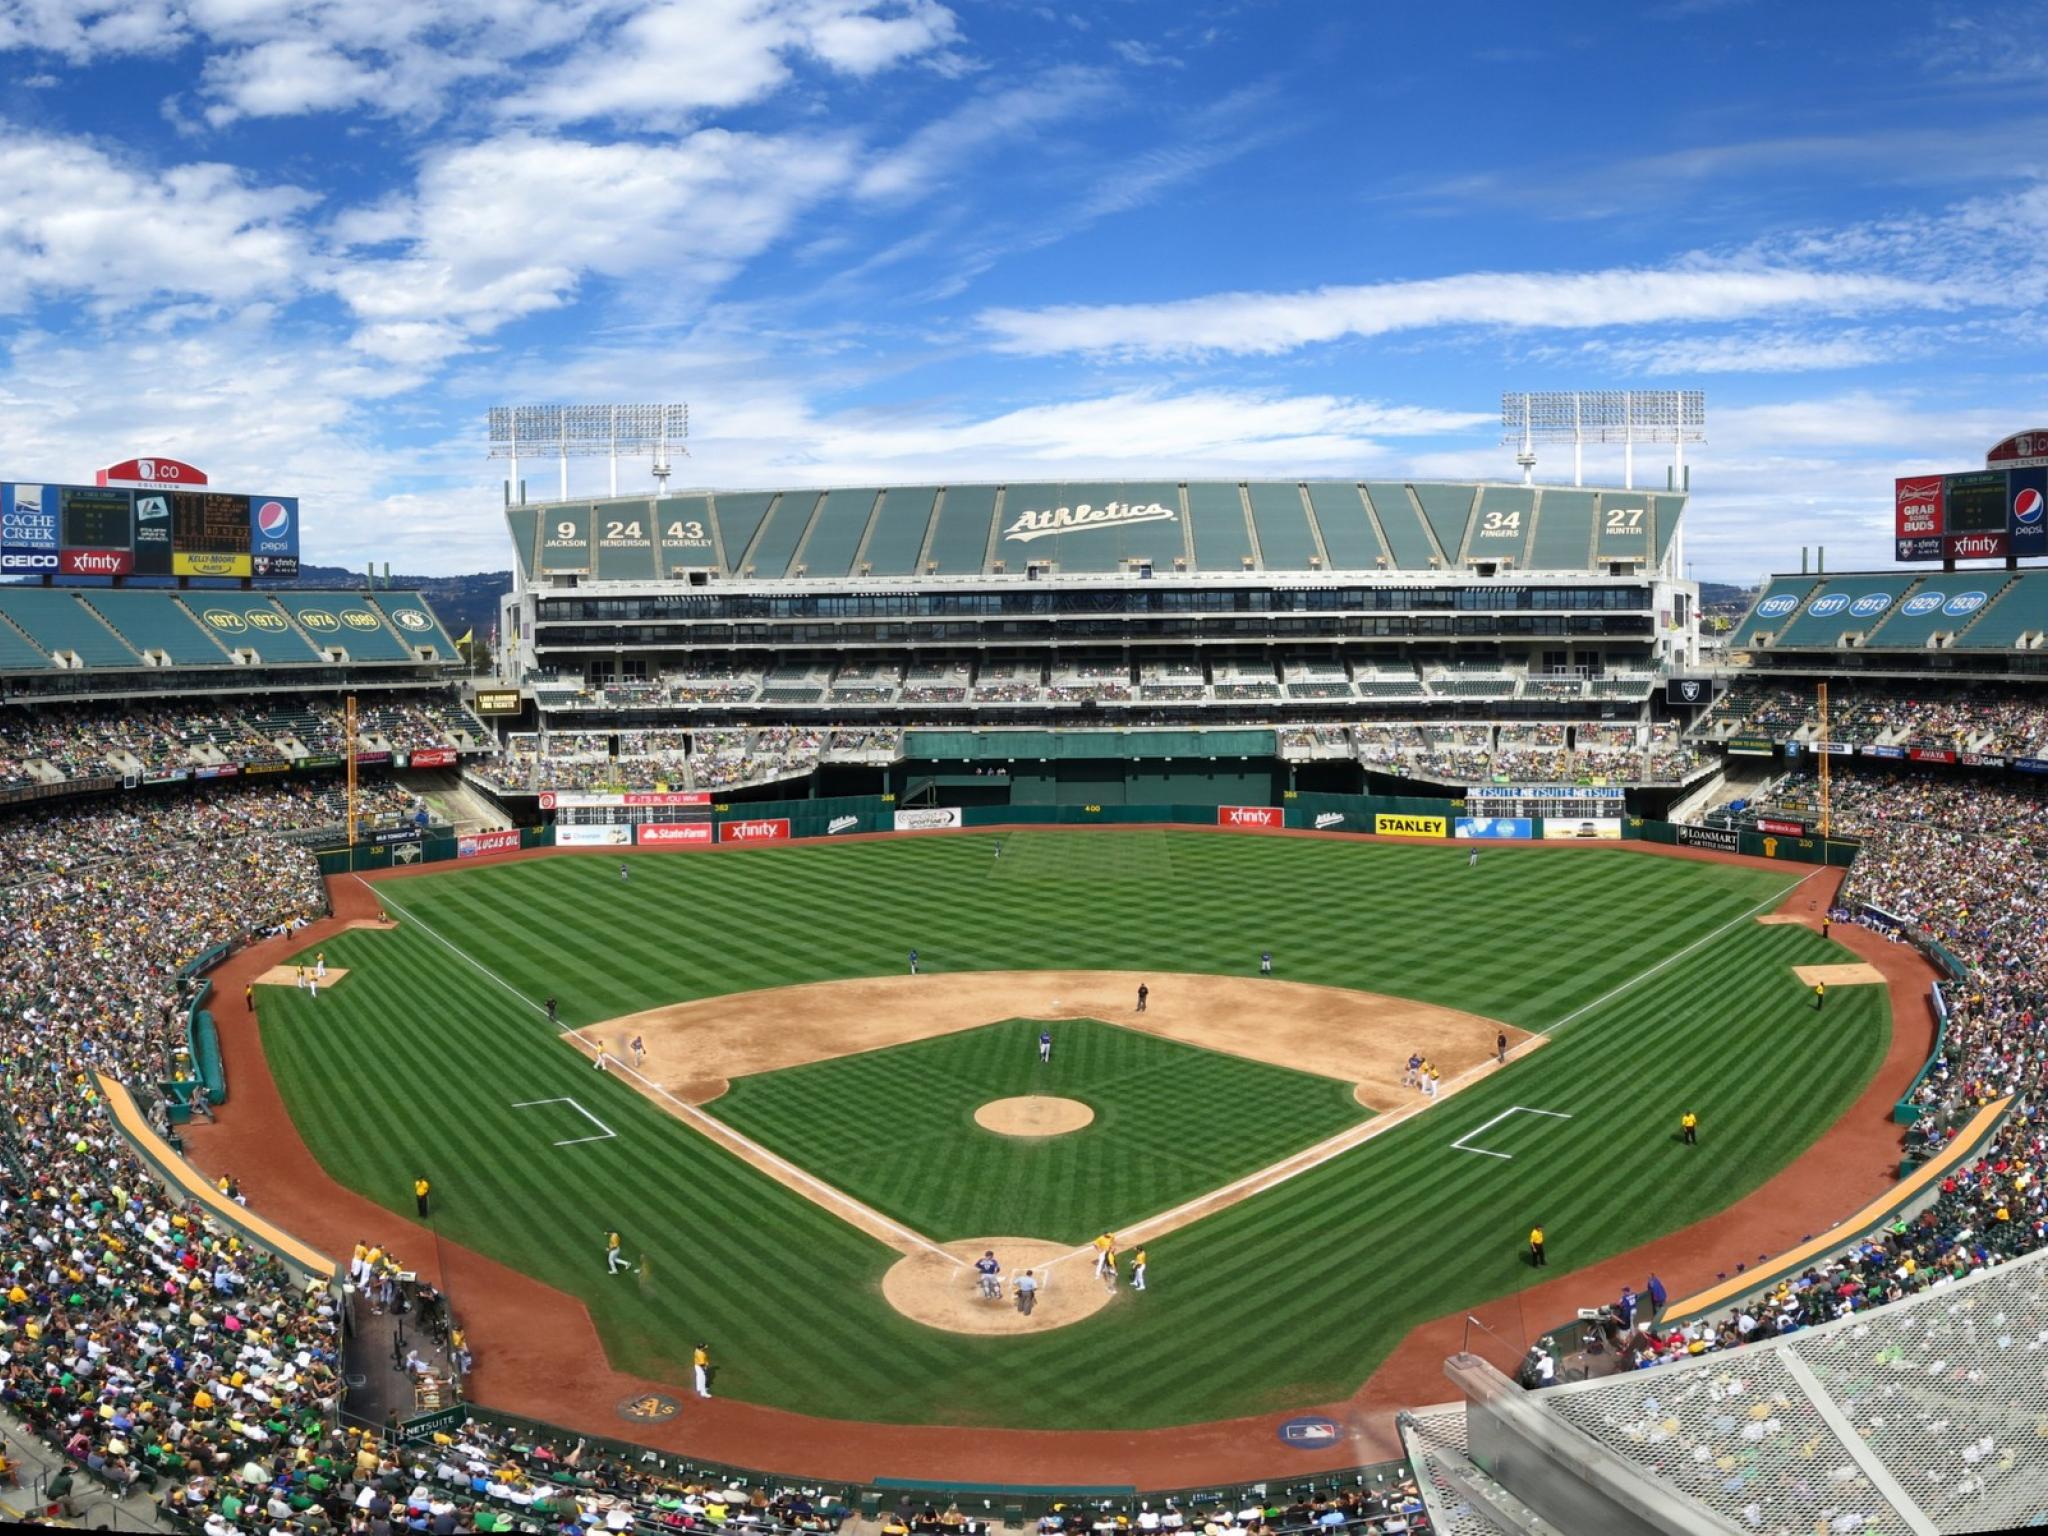  oakland-as-first-mlb-team-to-sell-tickets-for-bitcoin 